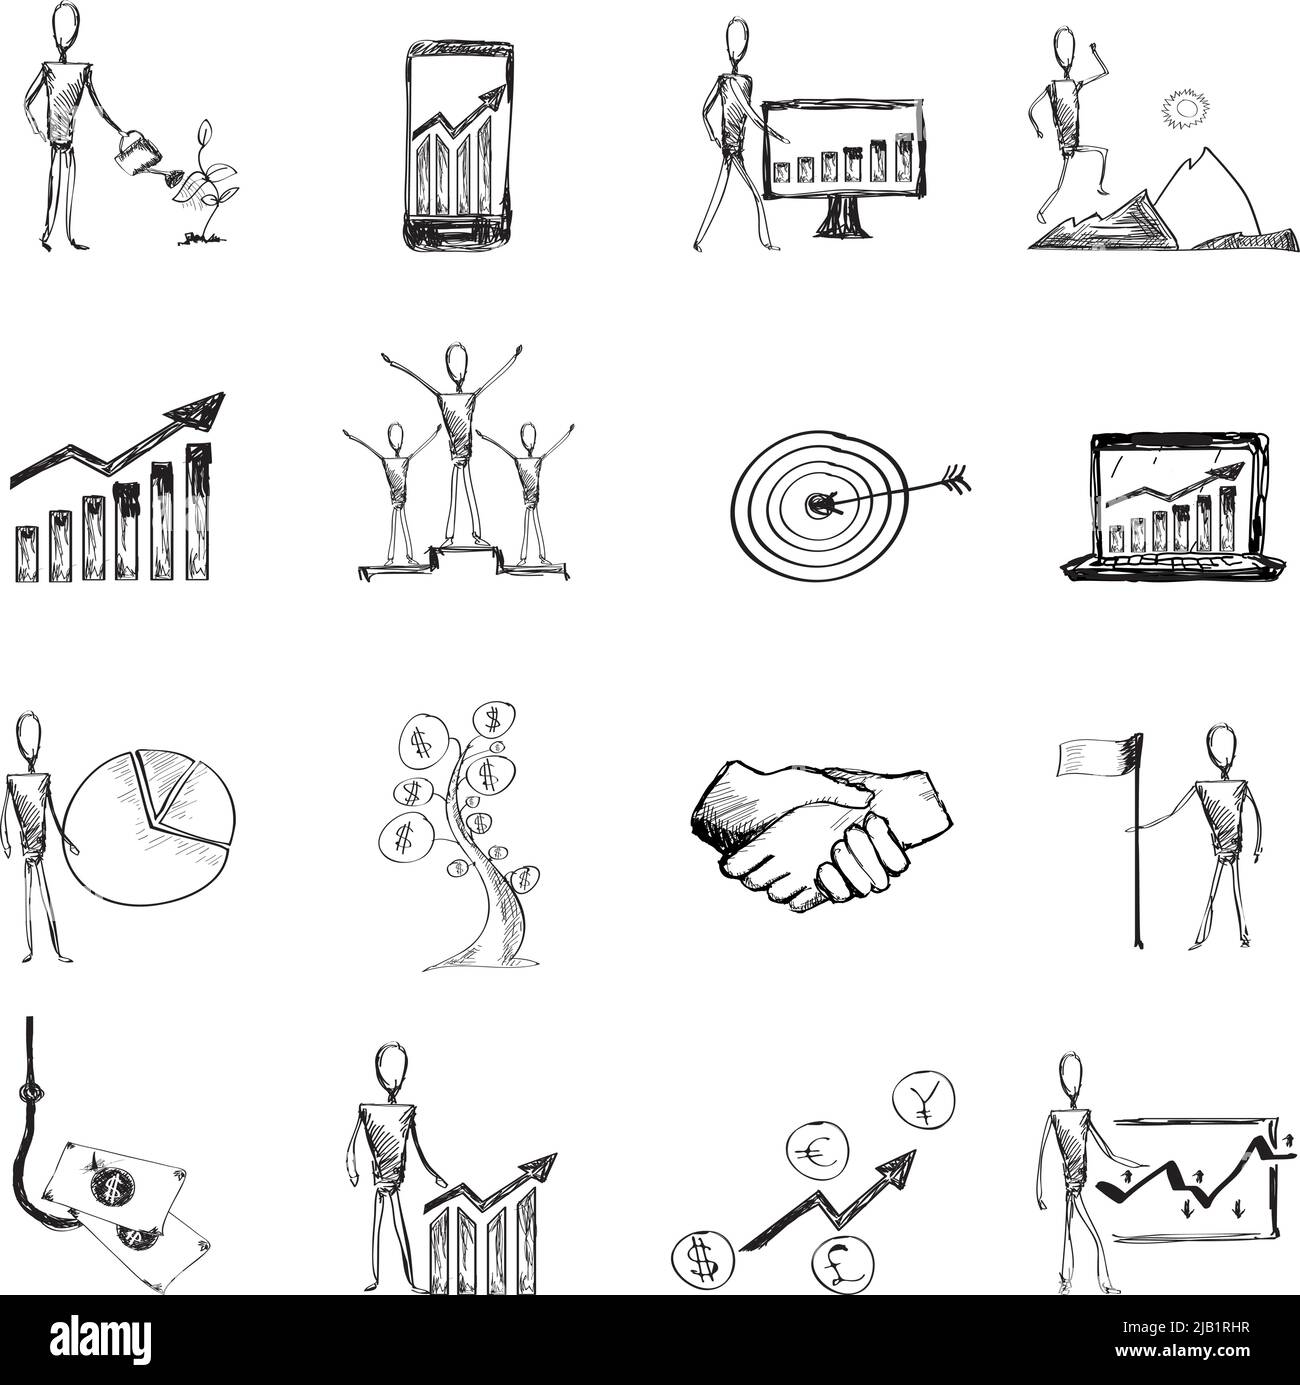 Sketch business organization management process people icons set isolated vector illustration Stock Vector